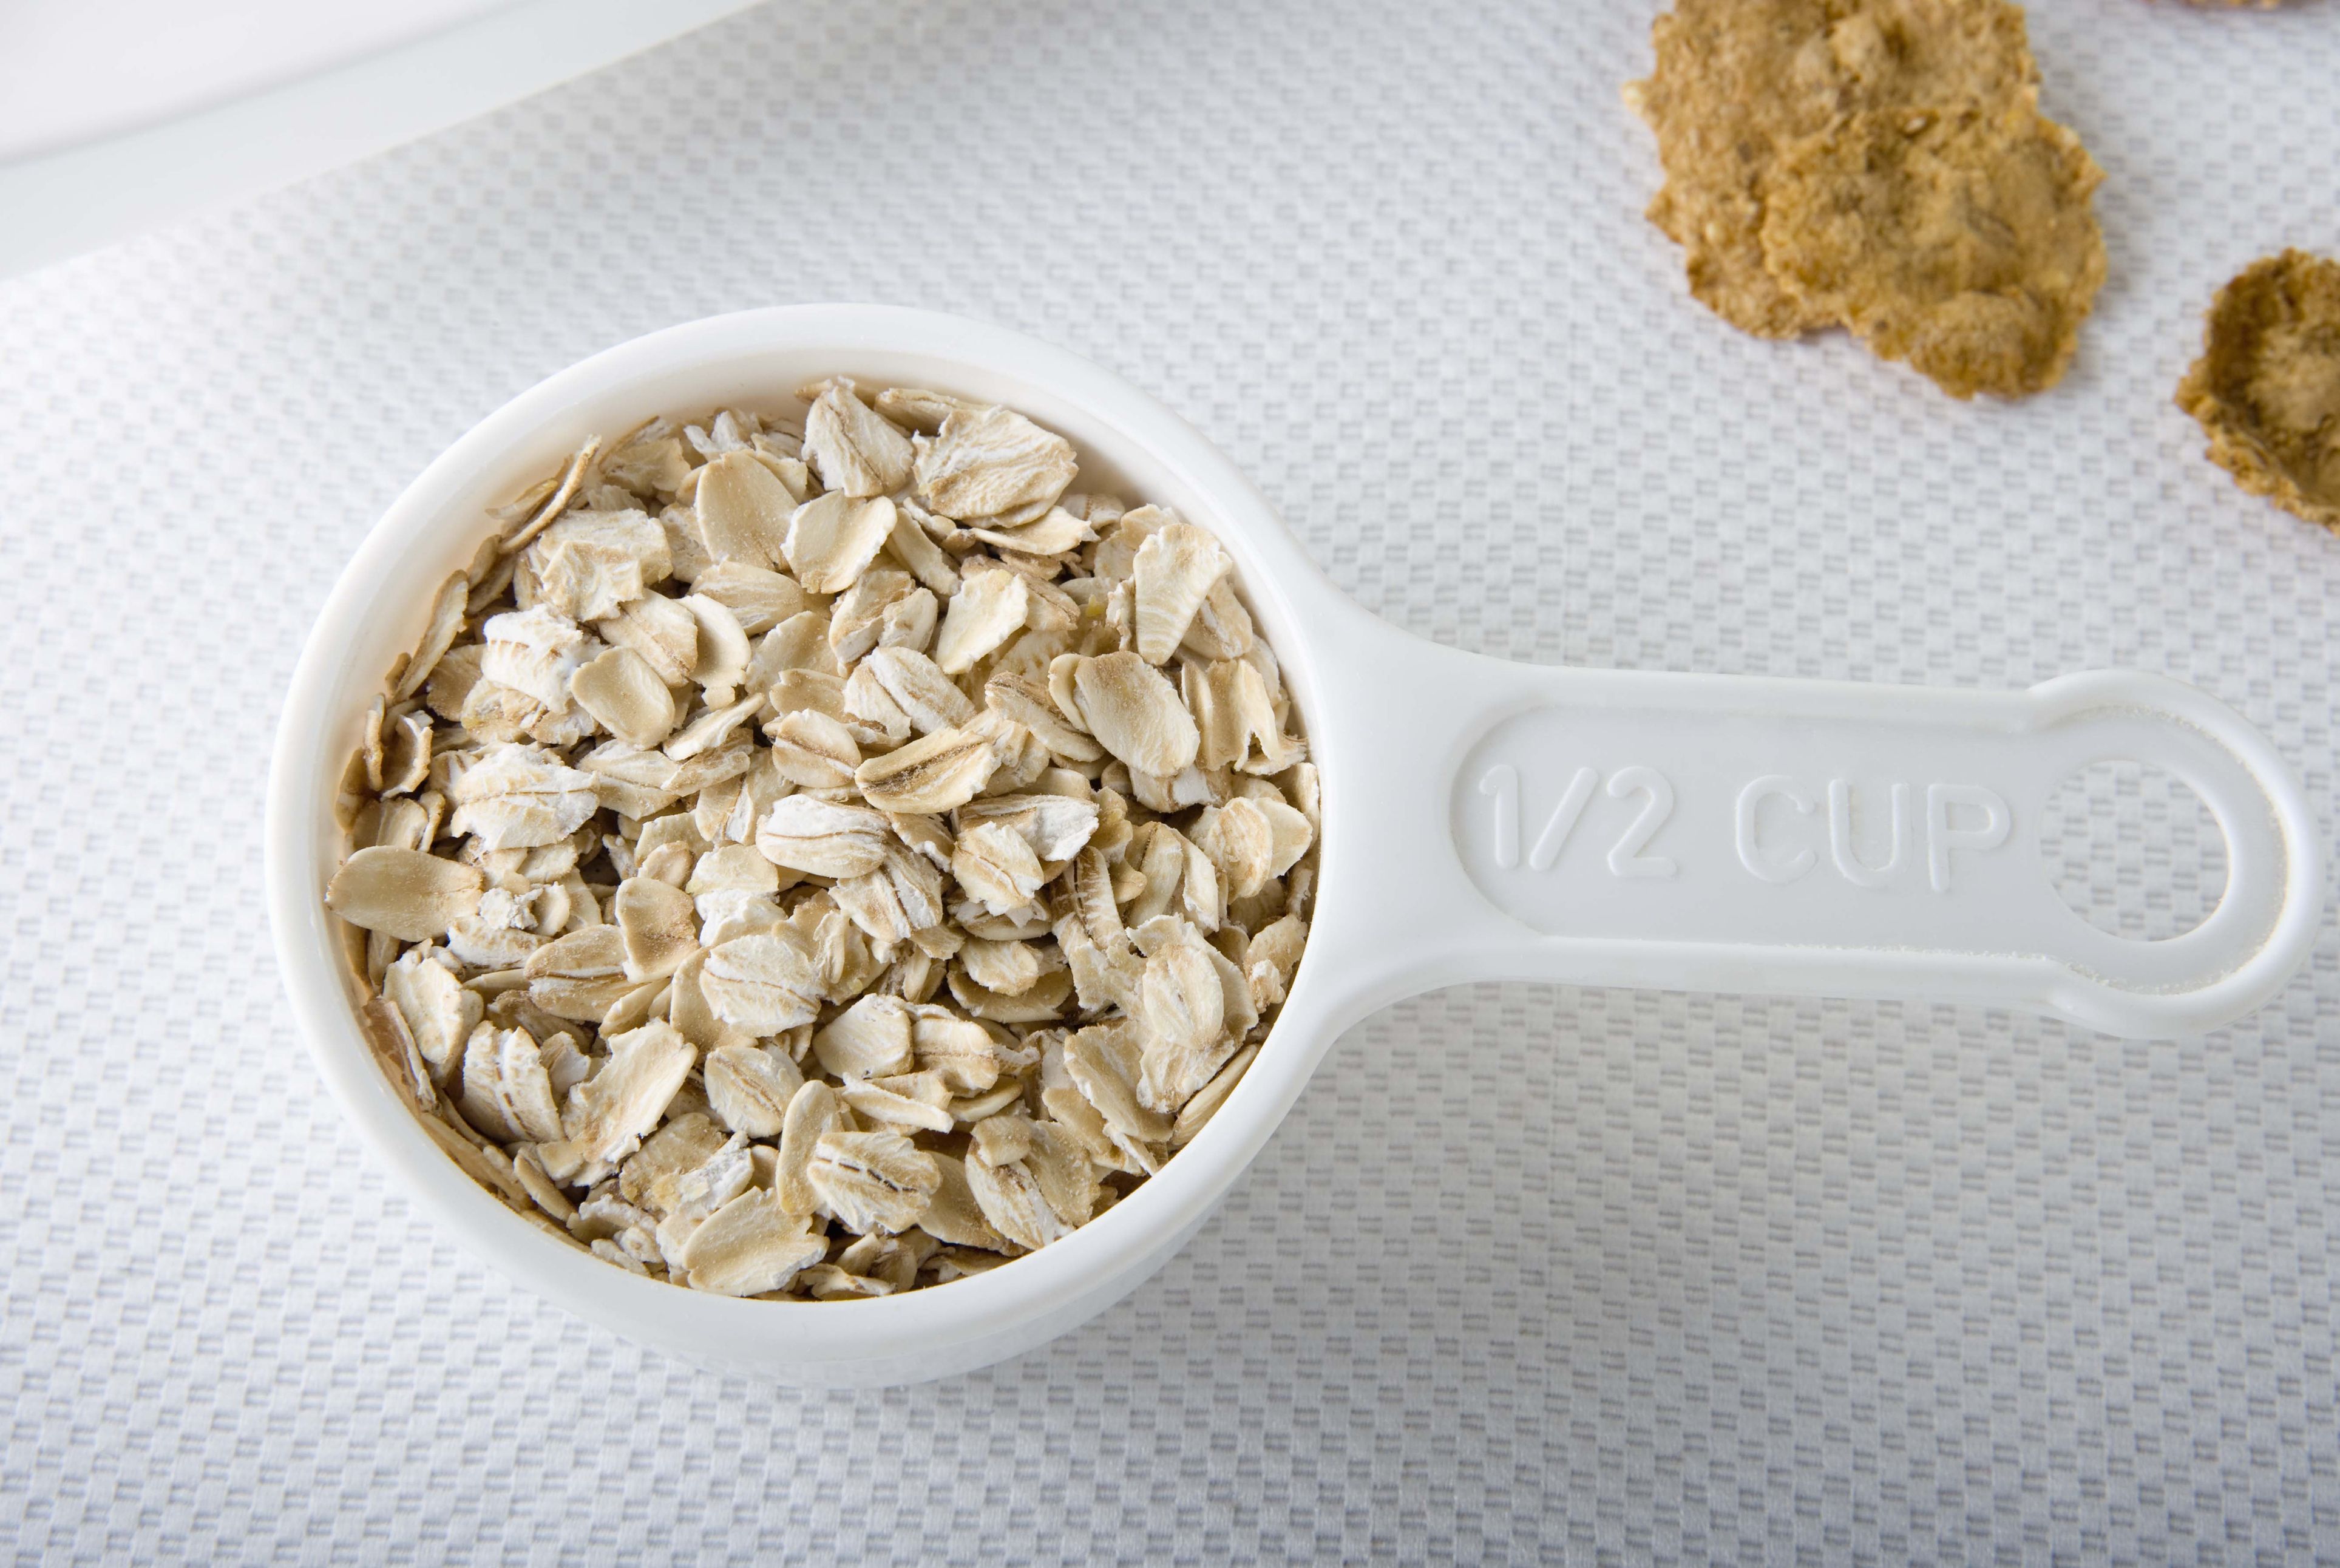 How Many Calories Are in Your Morning Bowl of Oatmeal?